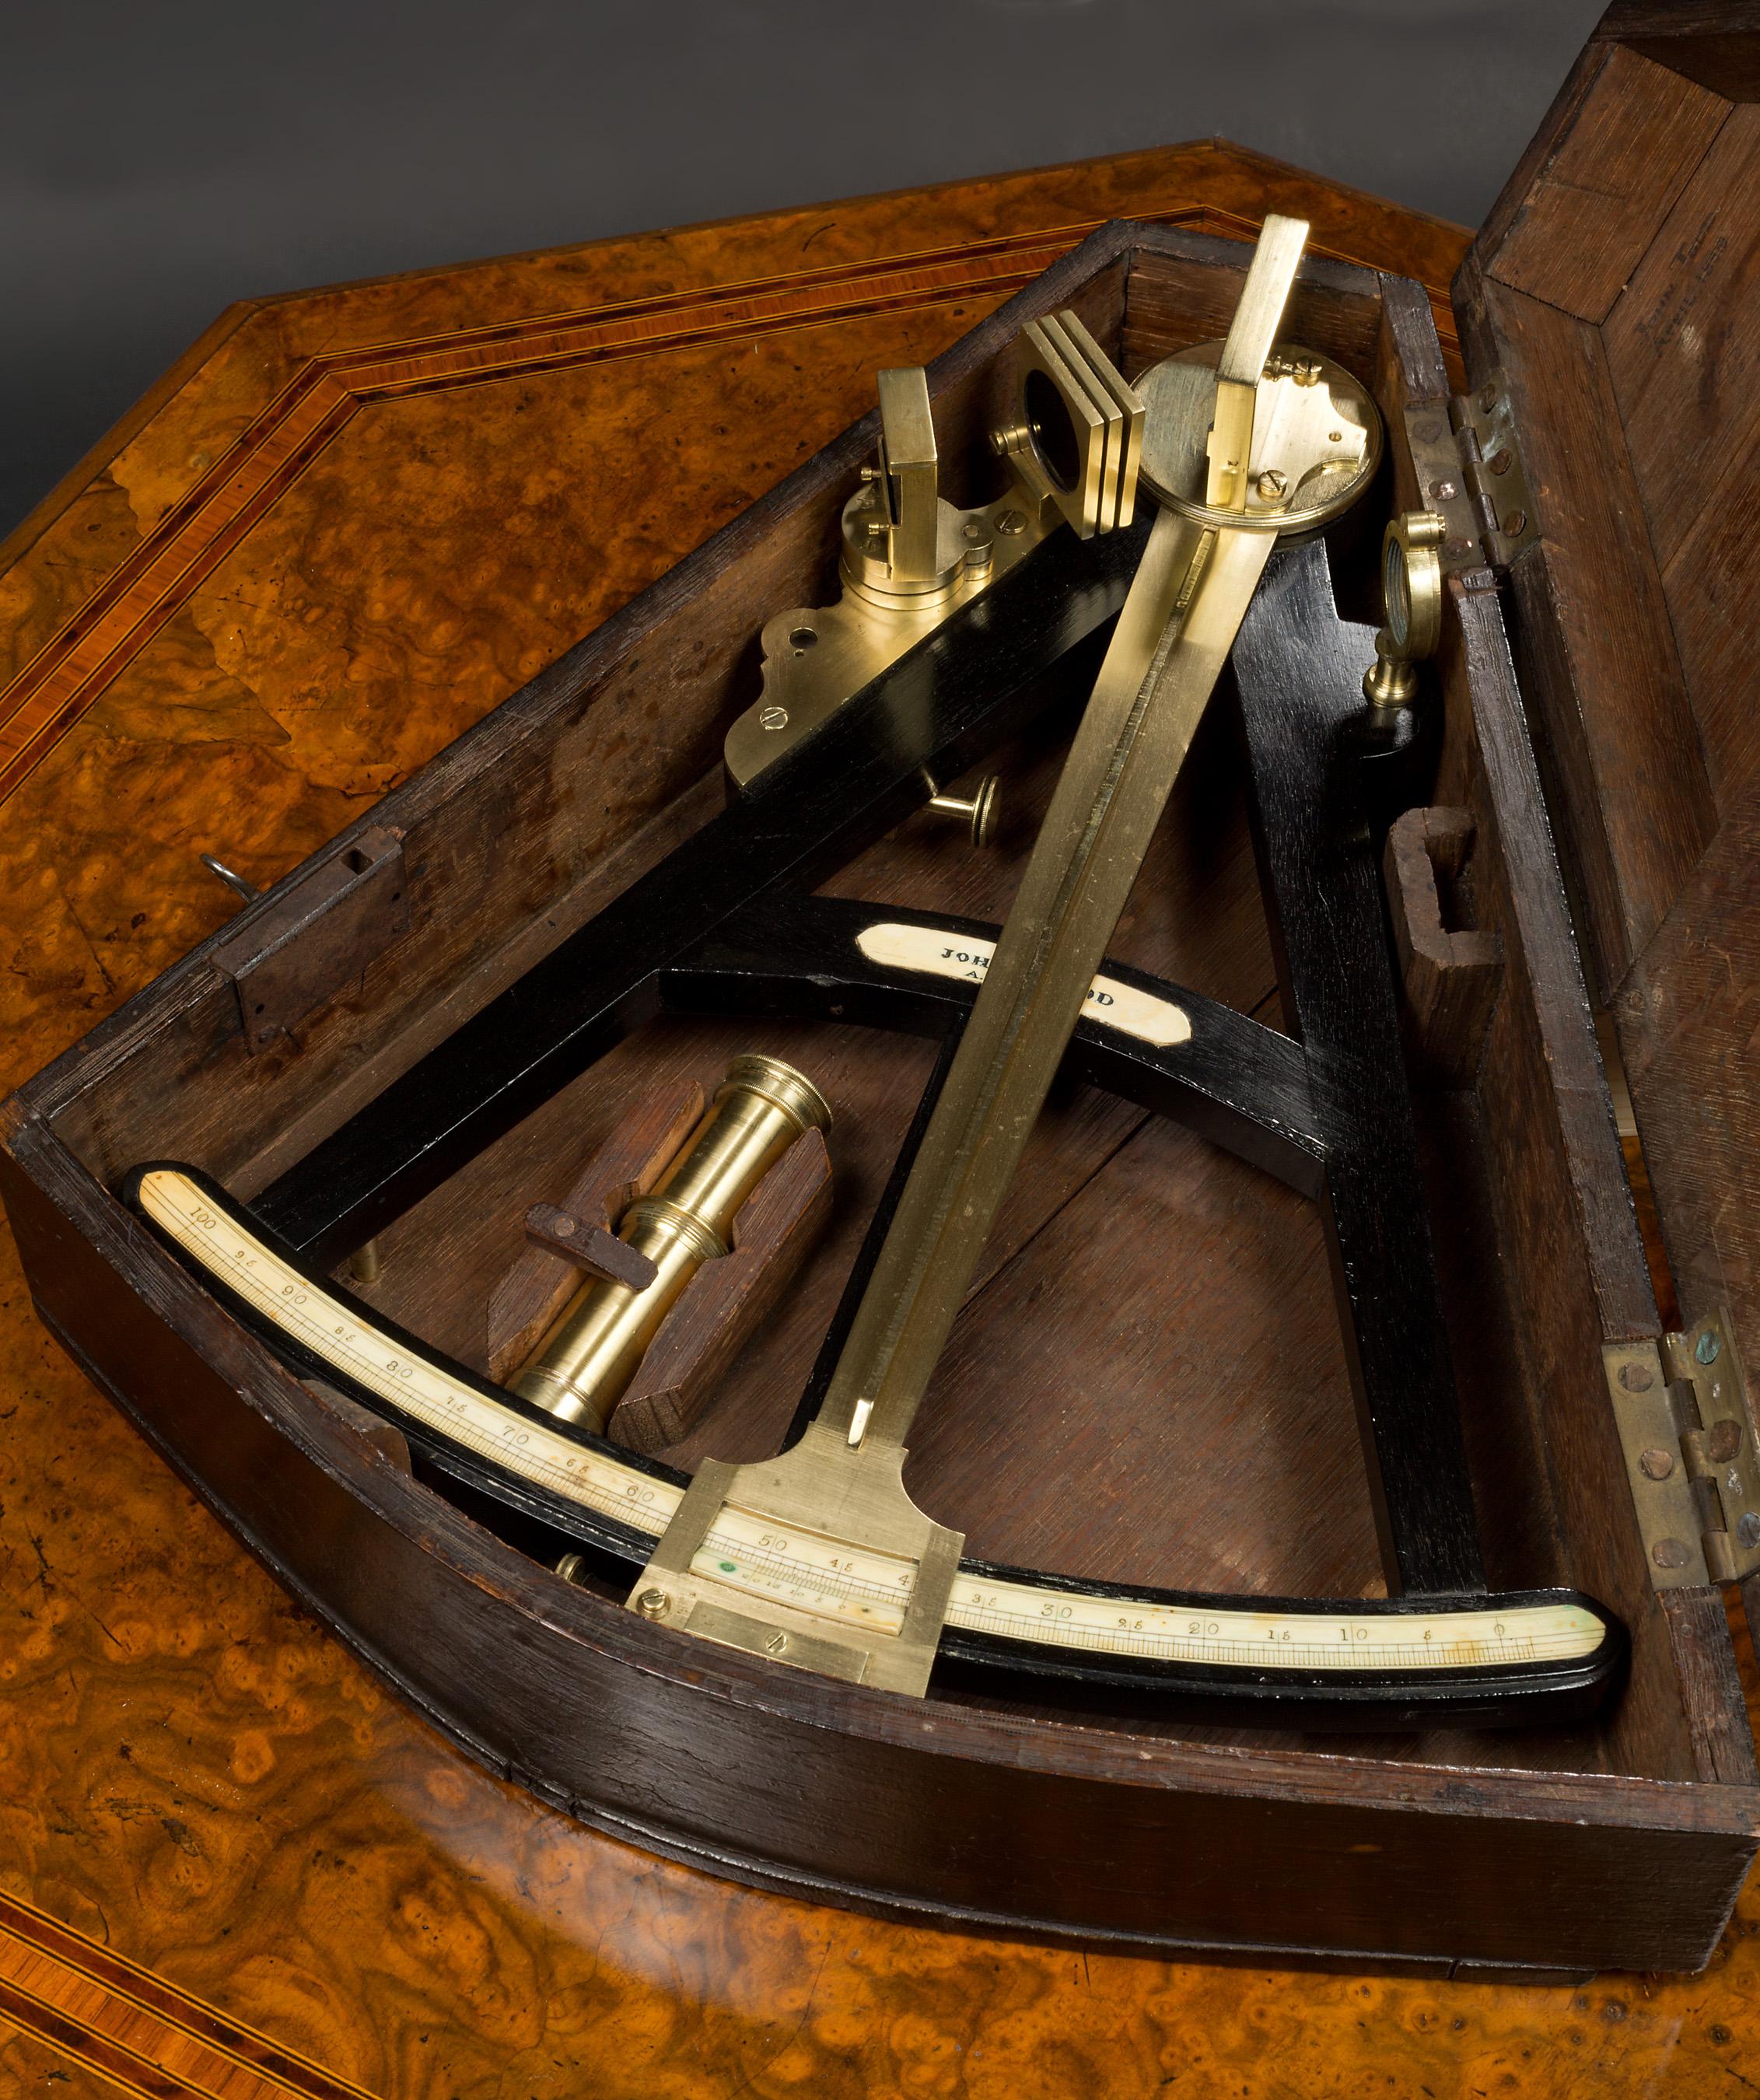 Vernier Octant by John Todd, London, circa 1850. 

An eleven inch radius vernier octant by John Todd with ebonised wooden frame with inset bone scale marked from 0 – 100 degrees with inset makers bone plaque. 

Lacquered brass index arm, pinhole